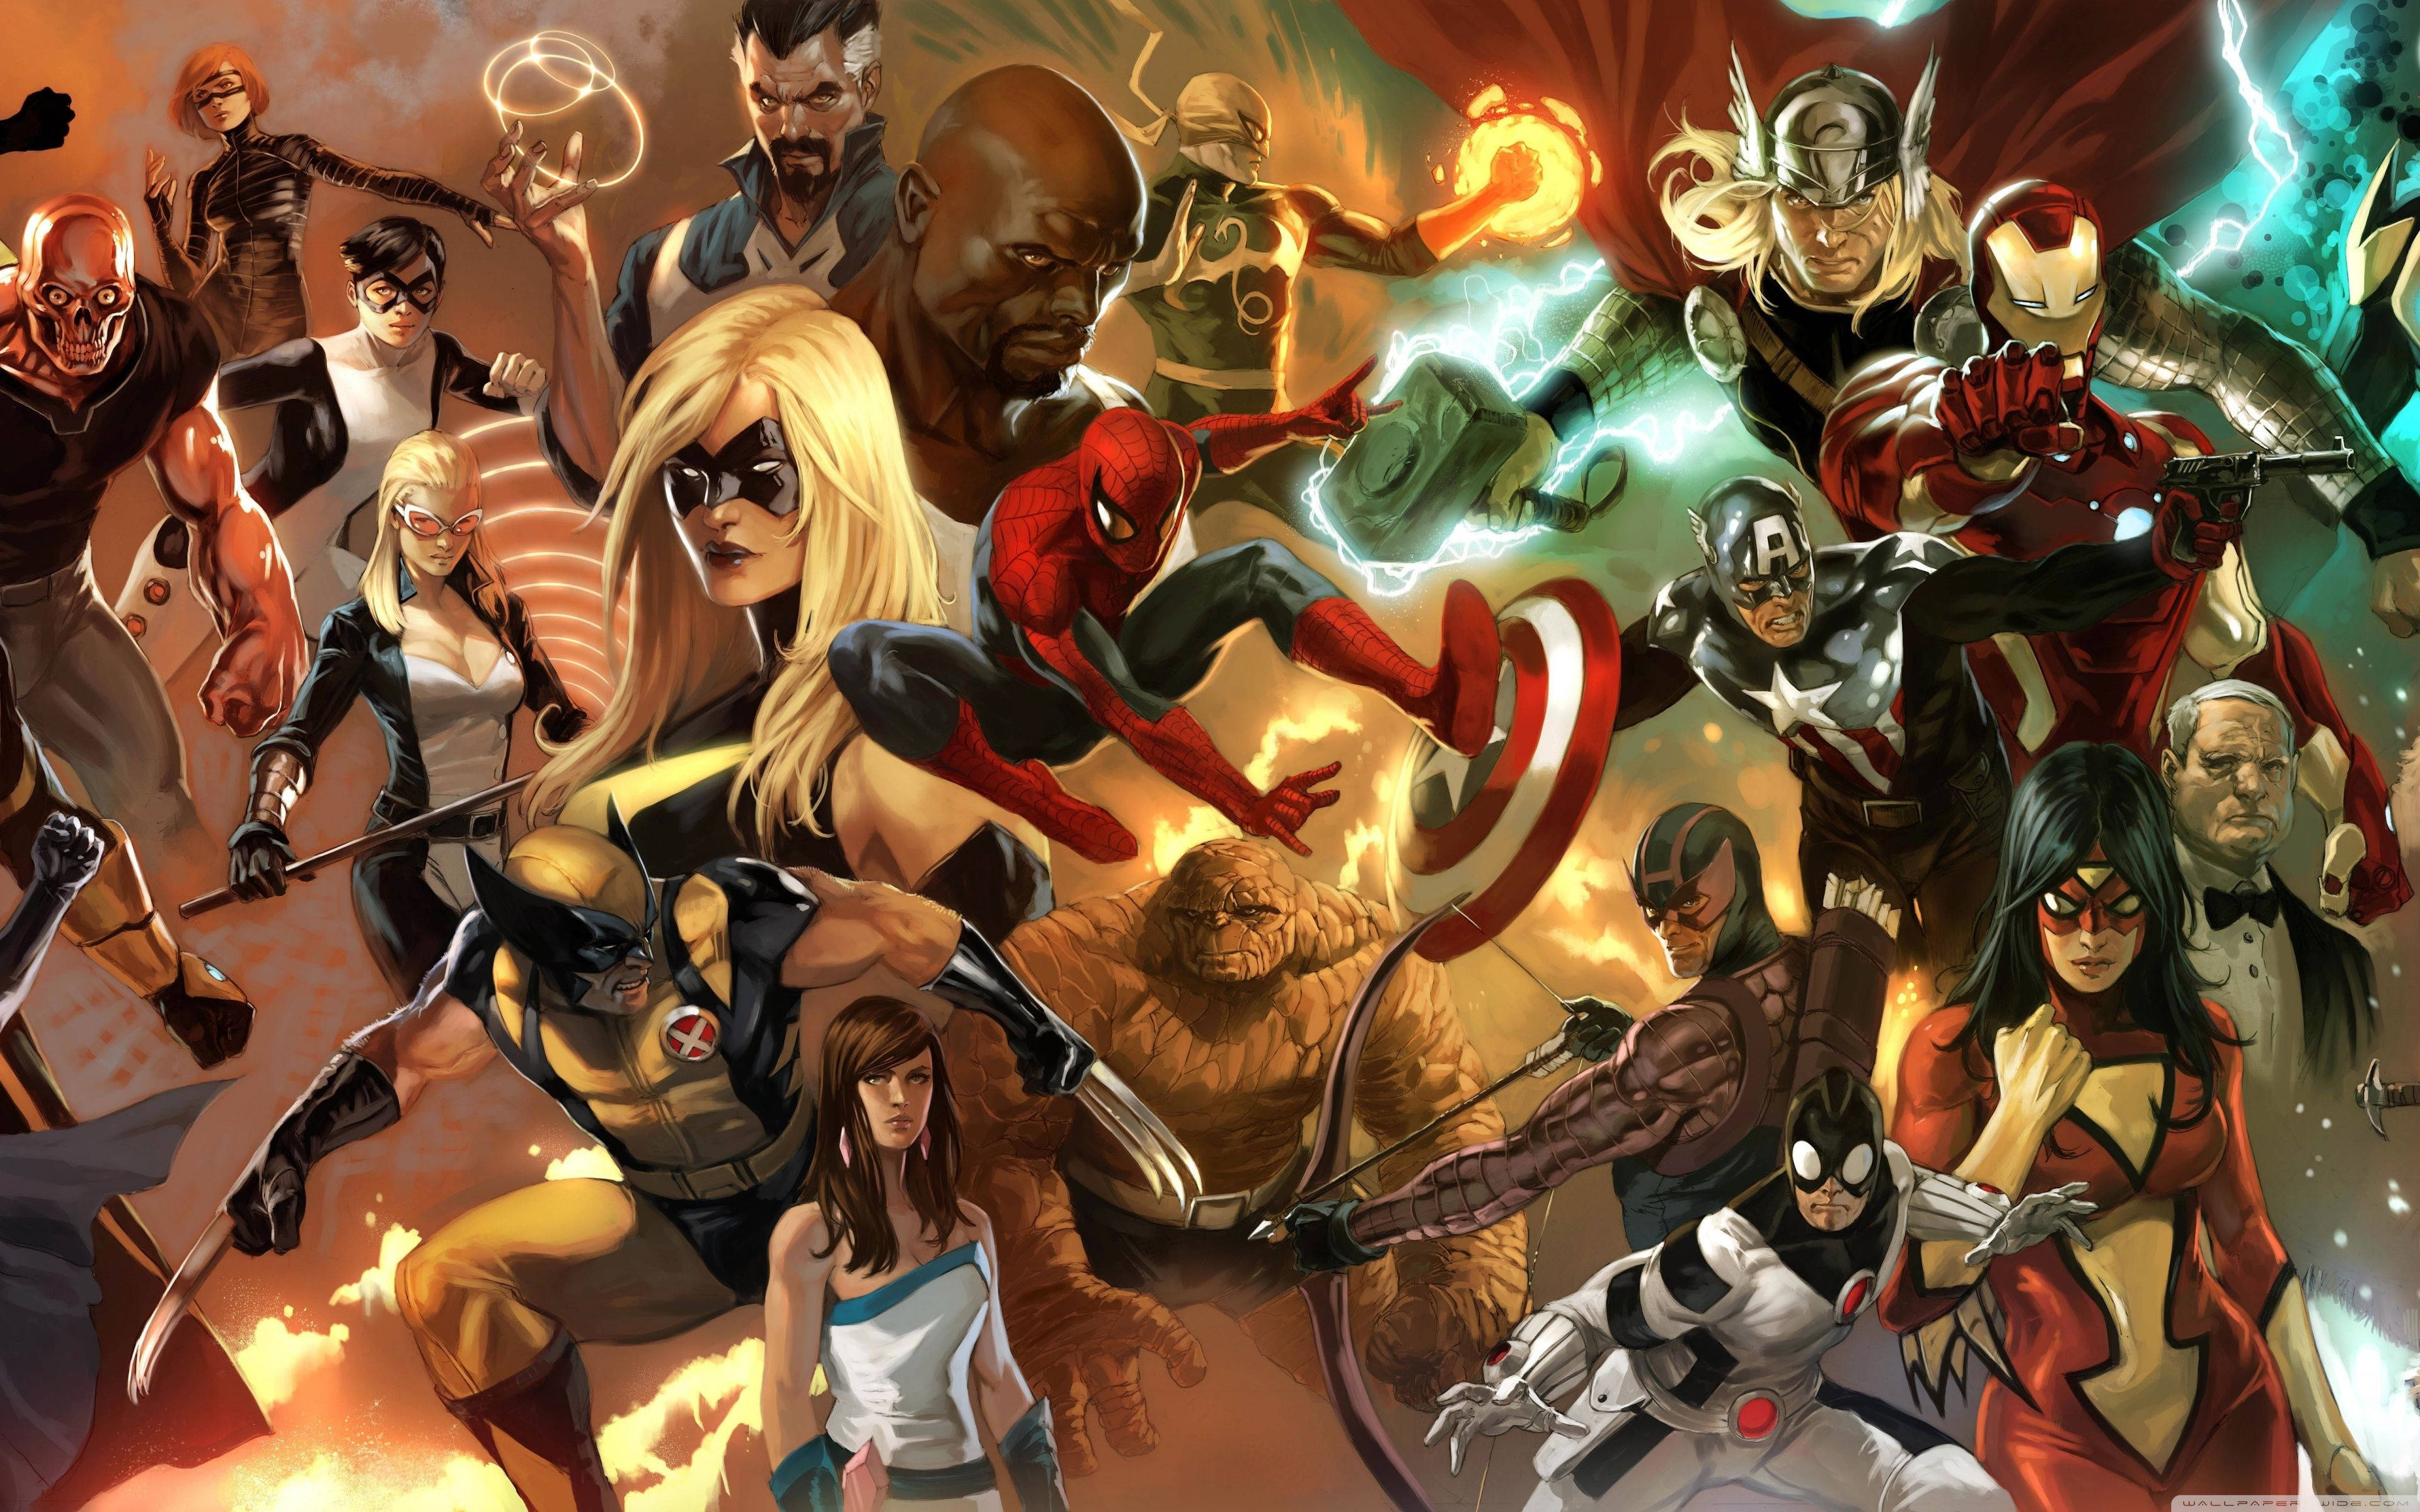 Avengers Animated Wallpapers